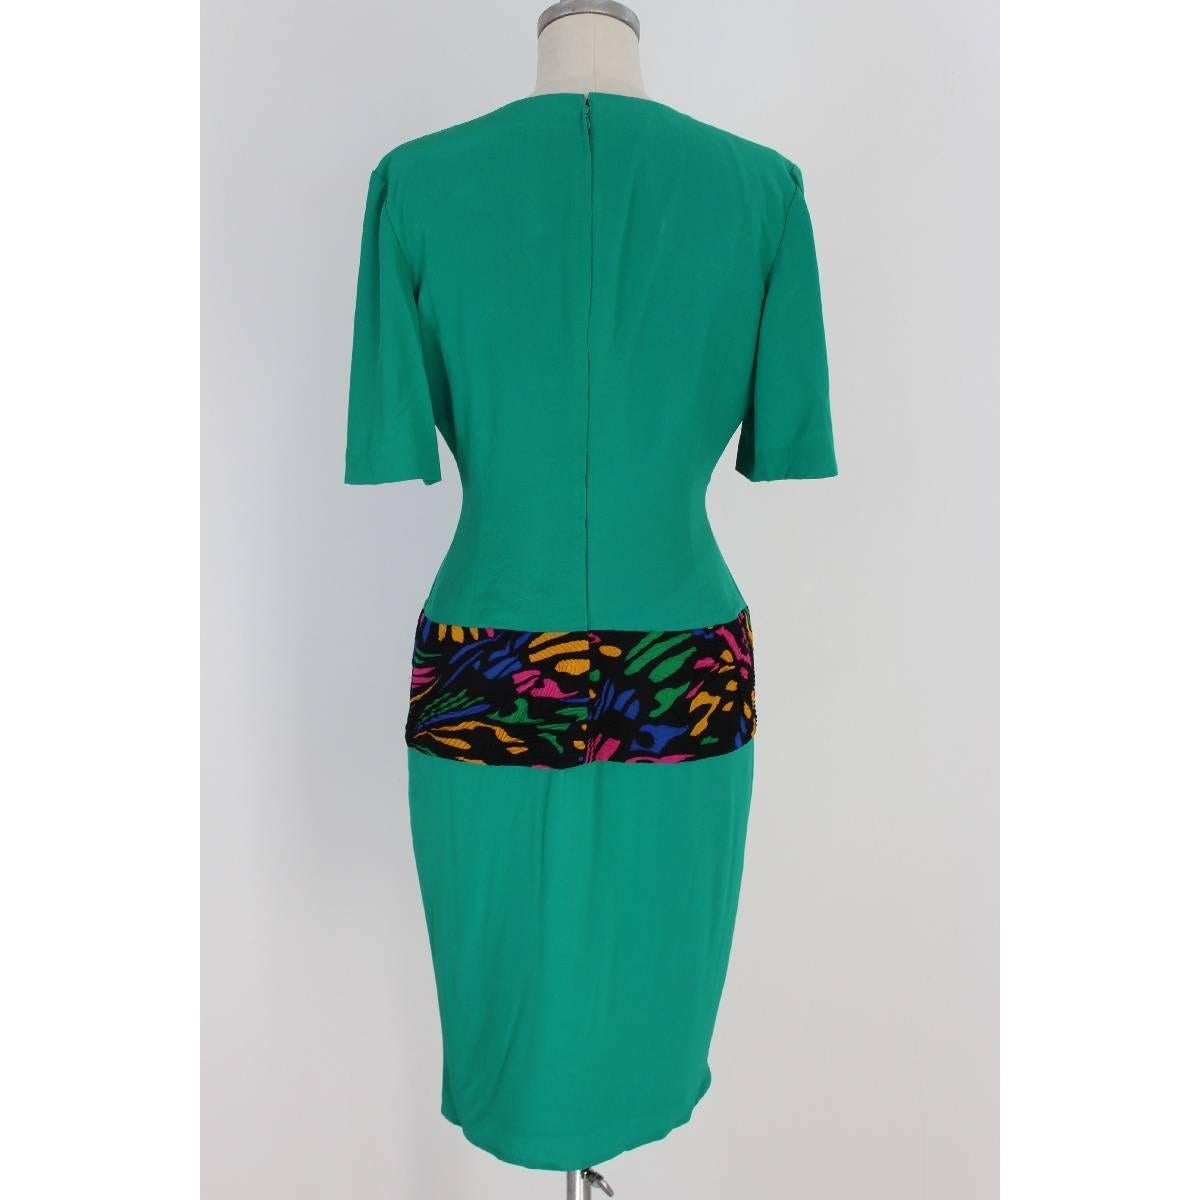 Green NWT Mila Schon 1980s silk green dress plisse sz 44 made in italy new with label For Sale